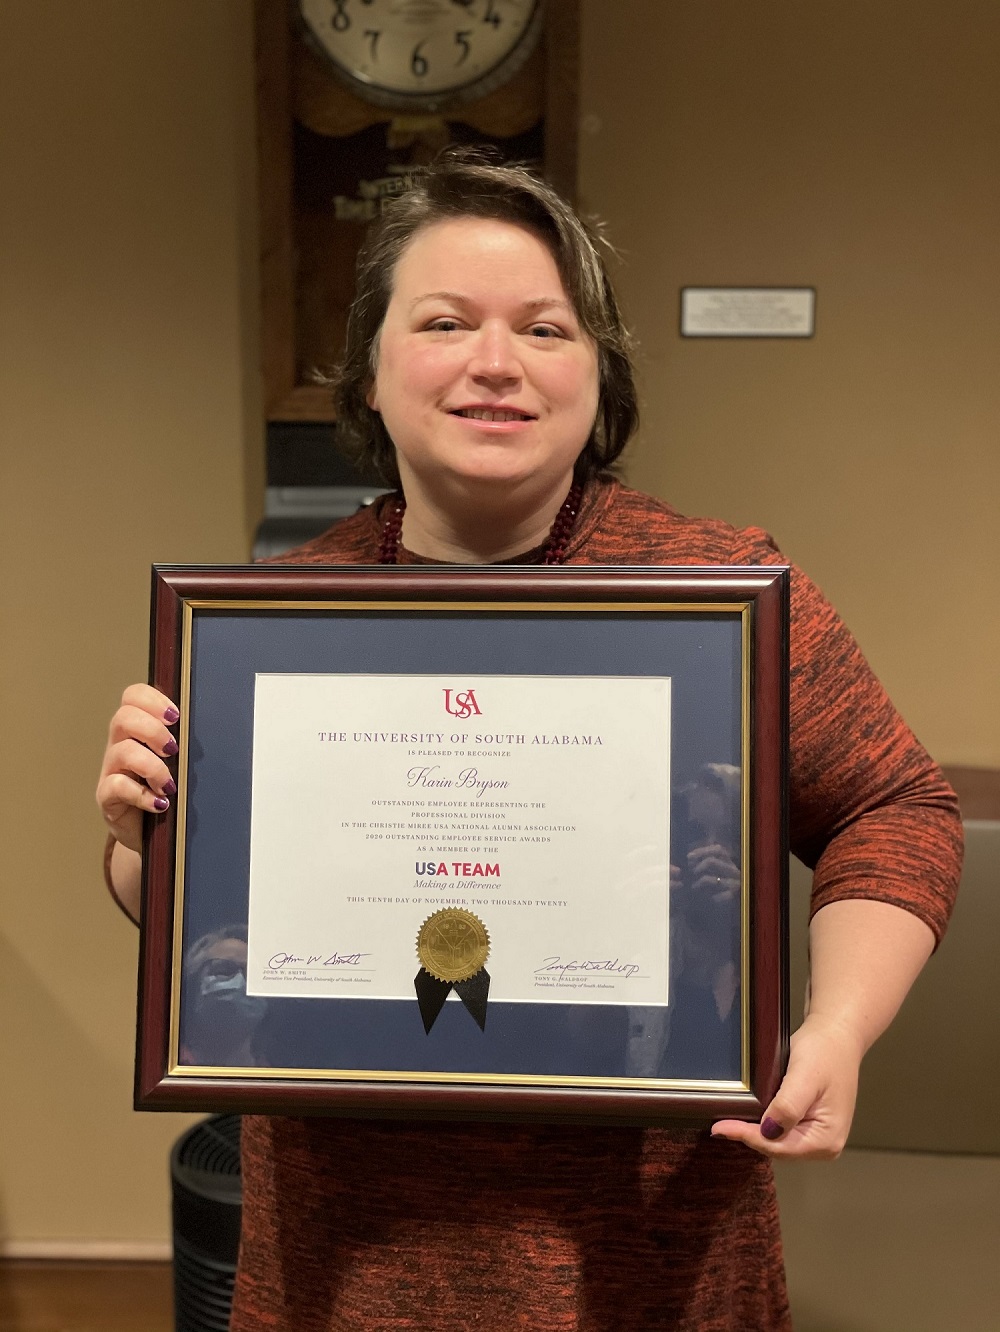 Staff Member of the Year Award. Karin Bryson was presented with her certificate today for the 2020 SOC Staff Member of the Year. The award was given during the SOC Virtual Awards presentation held in April. data-lightbox='featured'